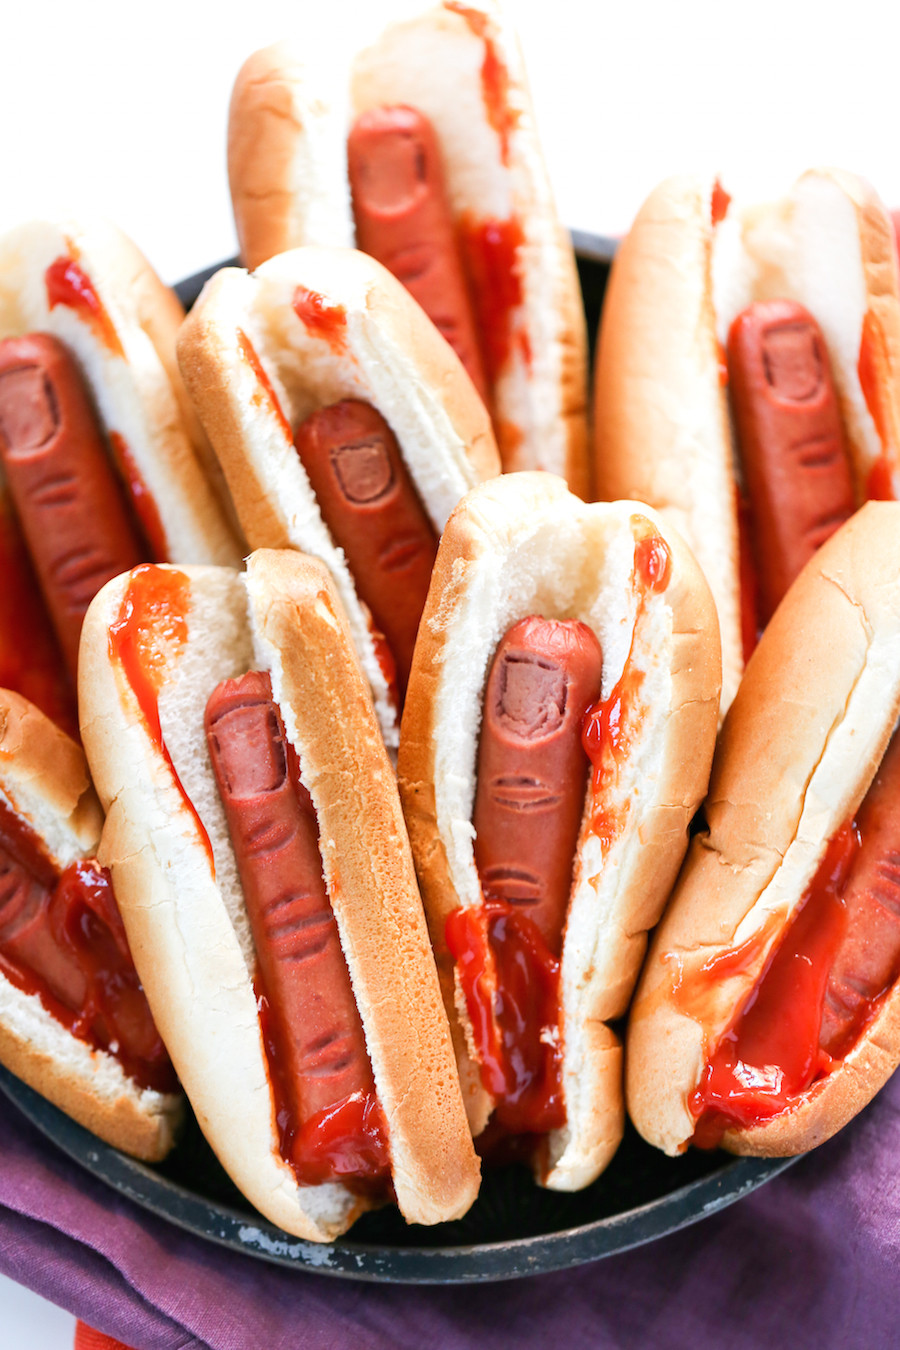 Halloween Hot Dogs
 Bloody Finger Hot Dogs for Halloween